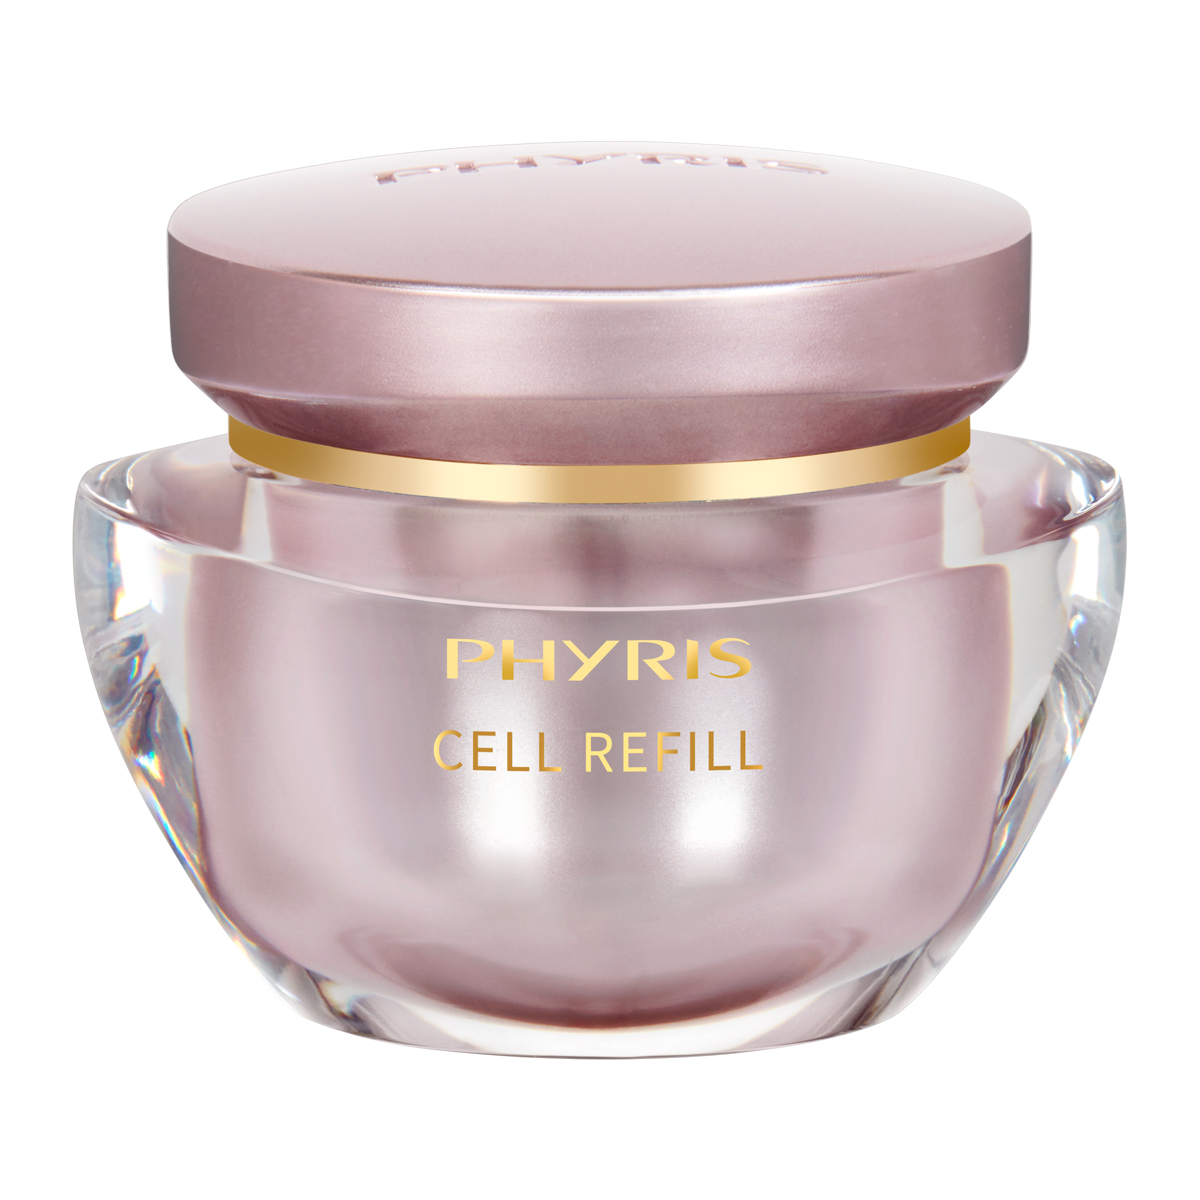 Phyris PERFECT AGE Cell Refill 50 ml